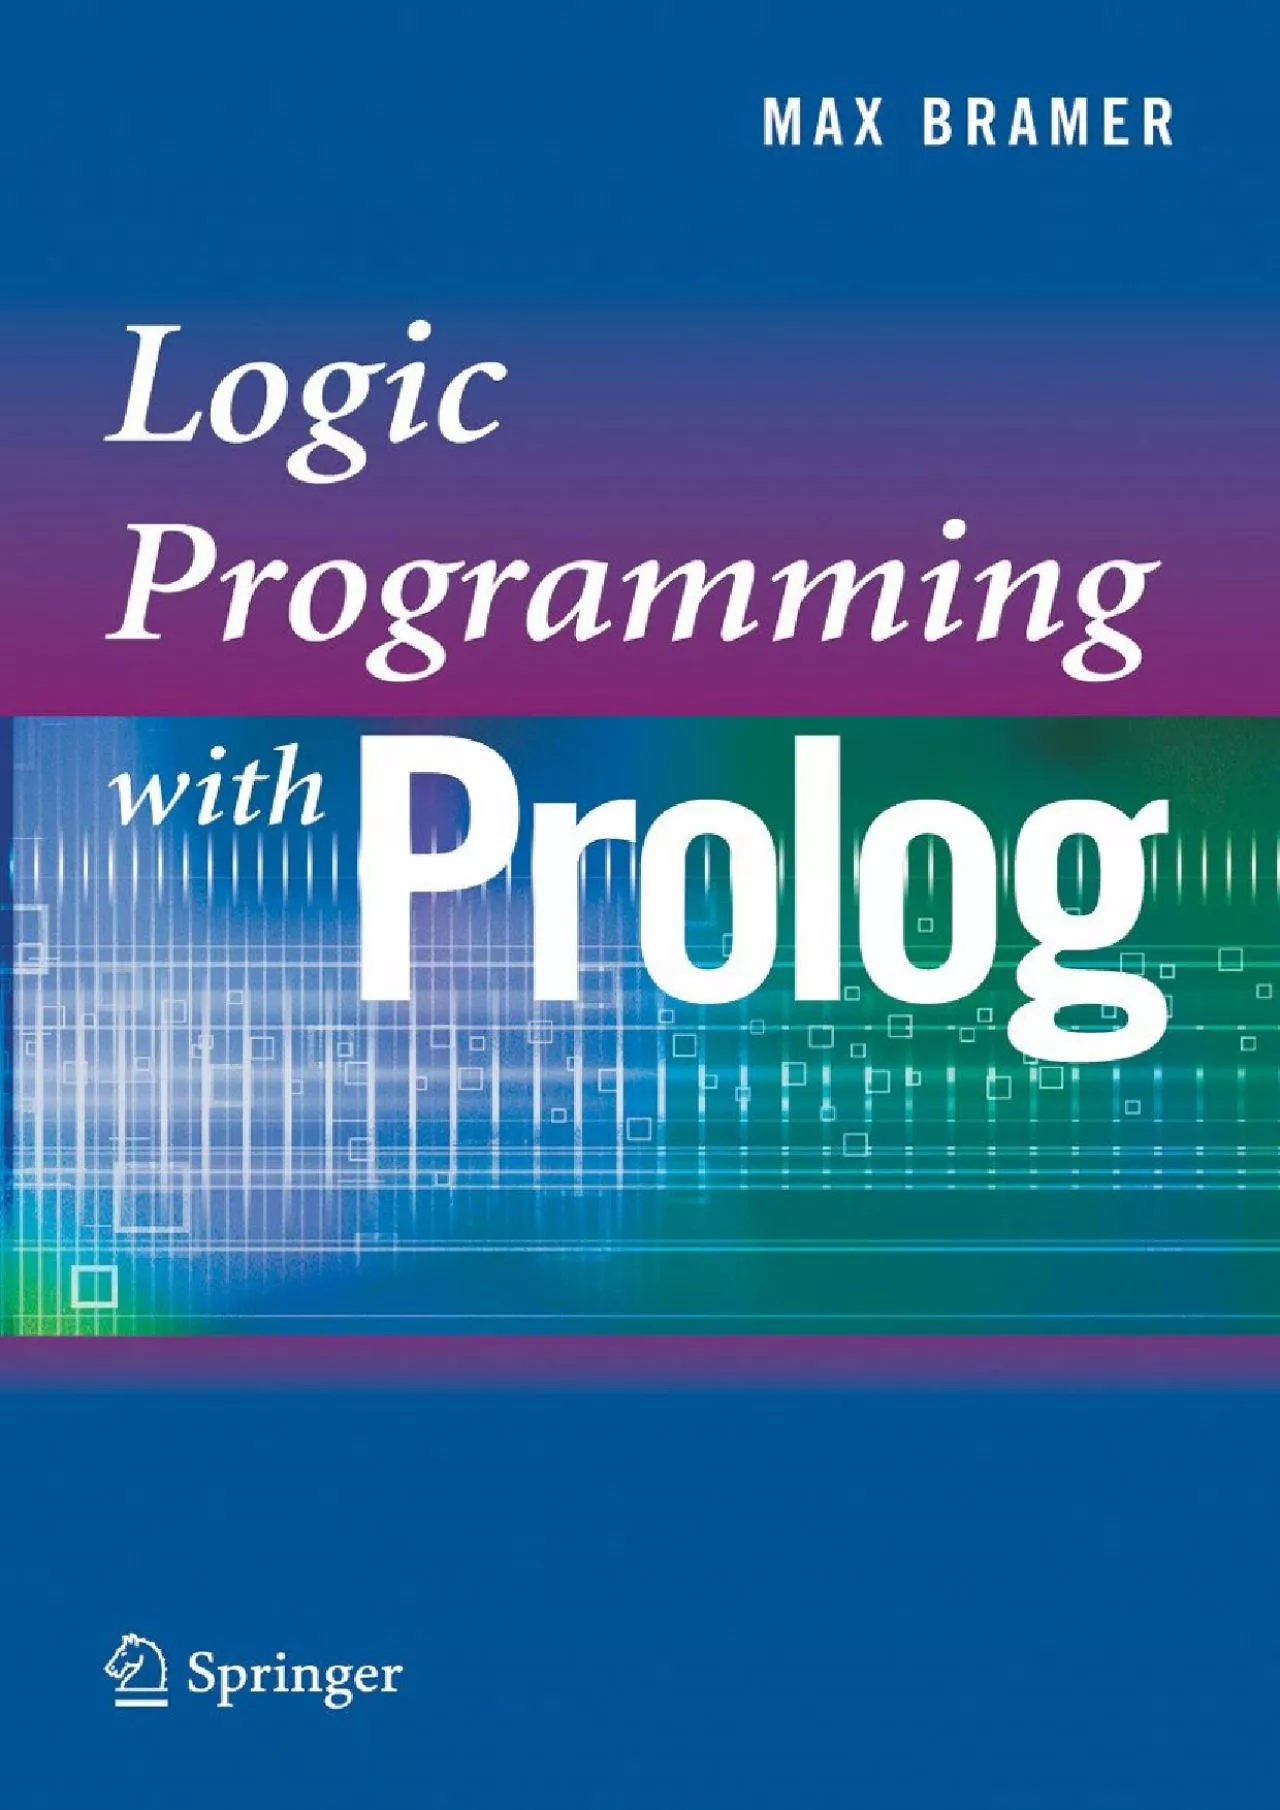 [READING BOOK]-Logic Programming with Prolog